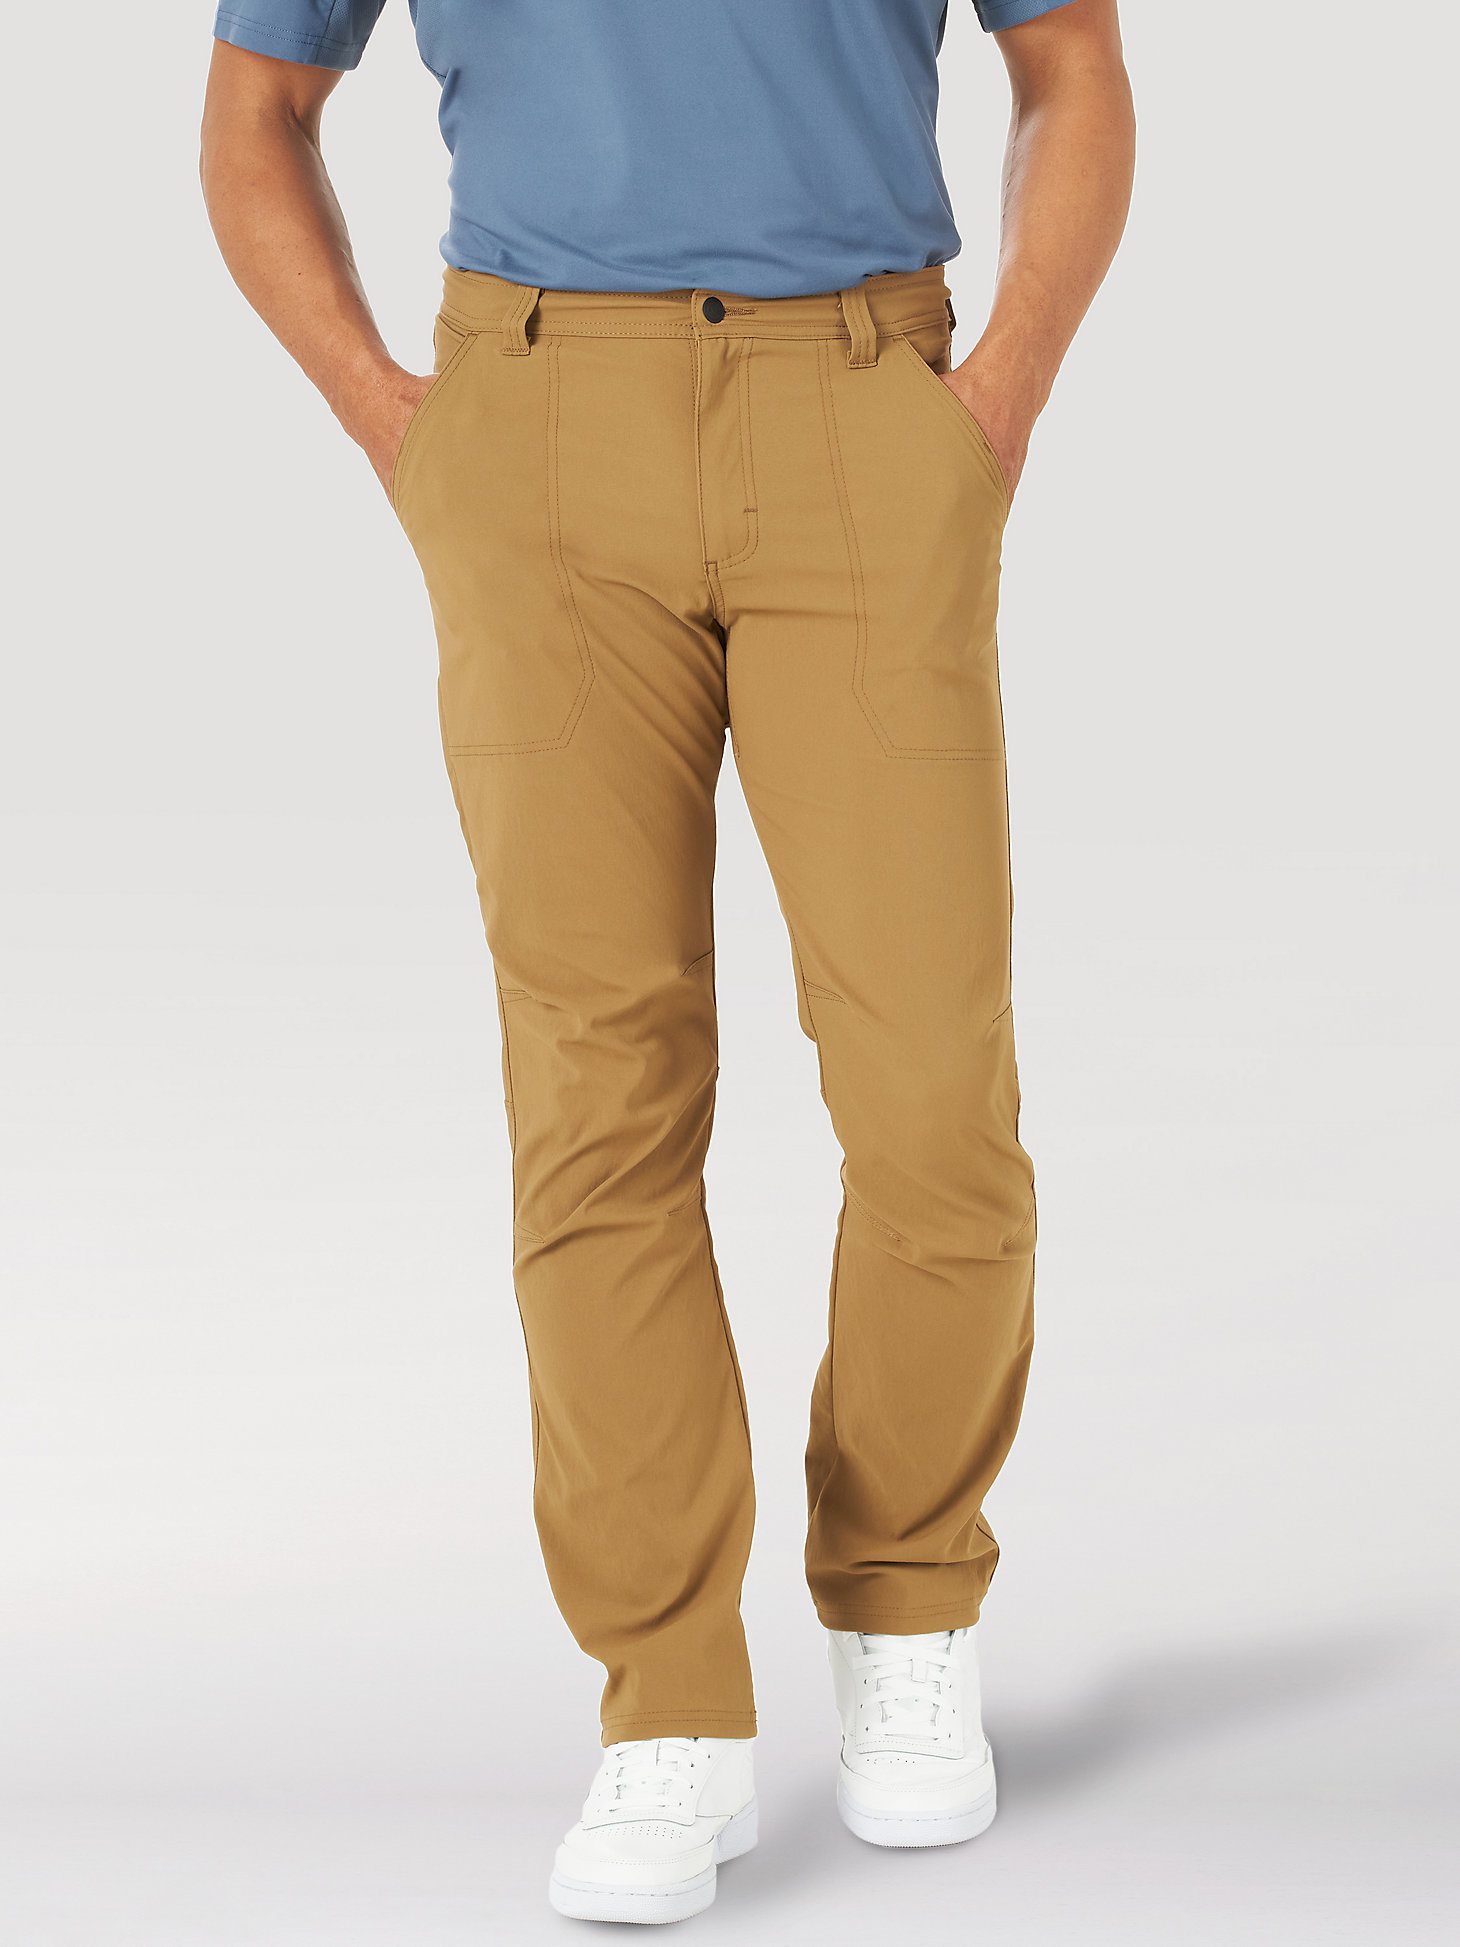 ATG by Wrangler™ Men's Trail Pant in Ermine main view